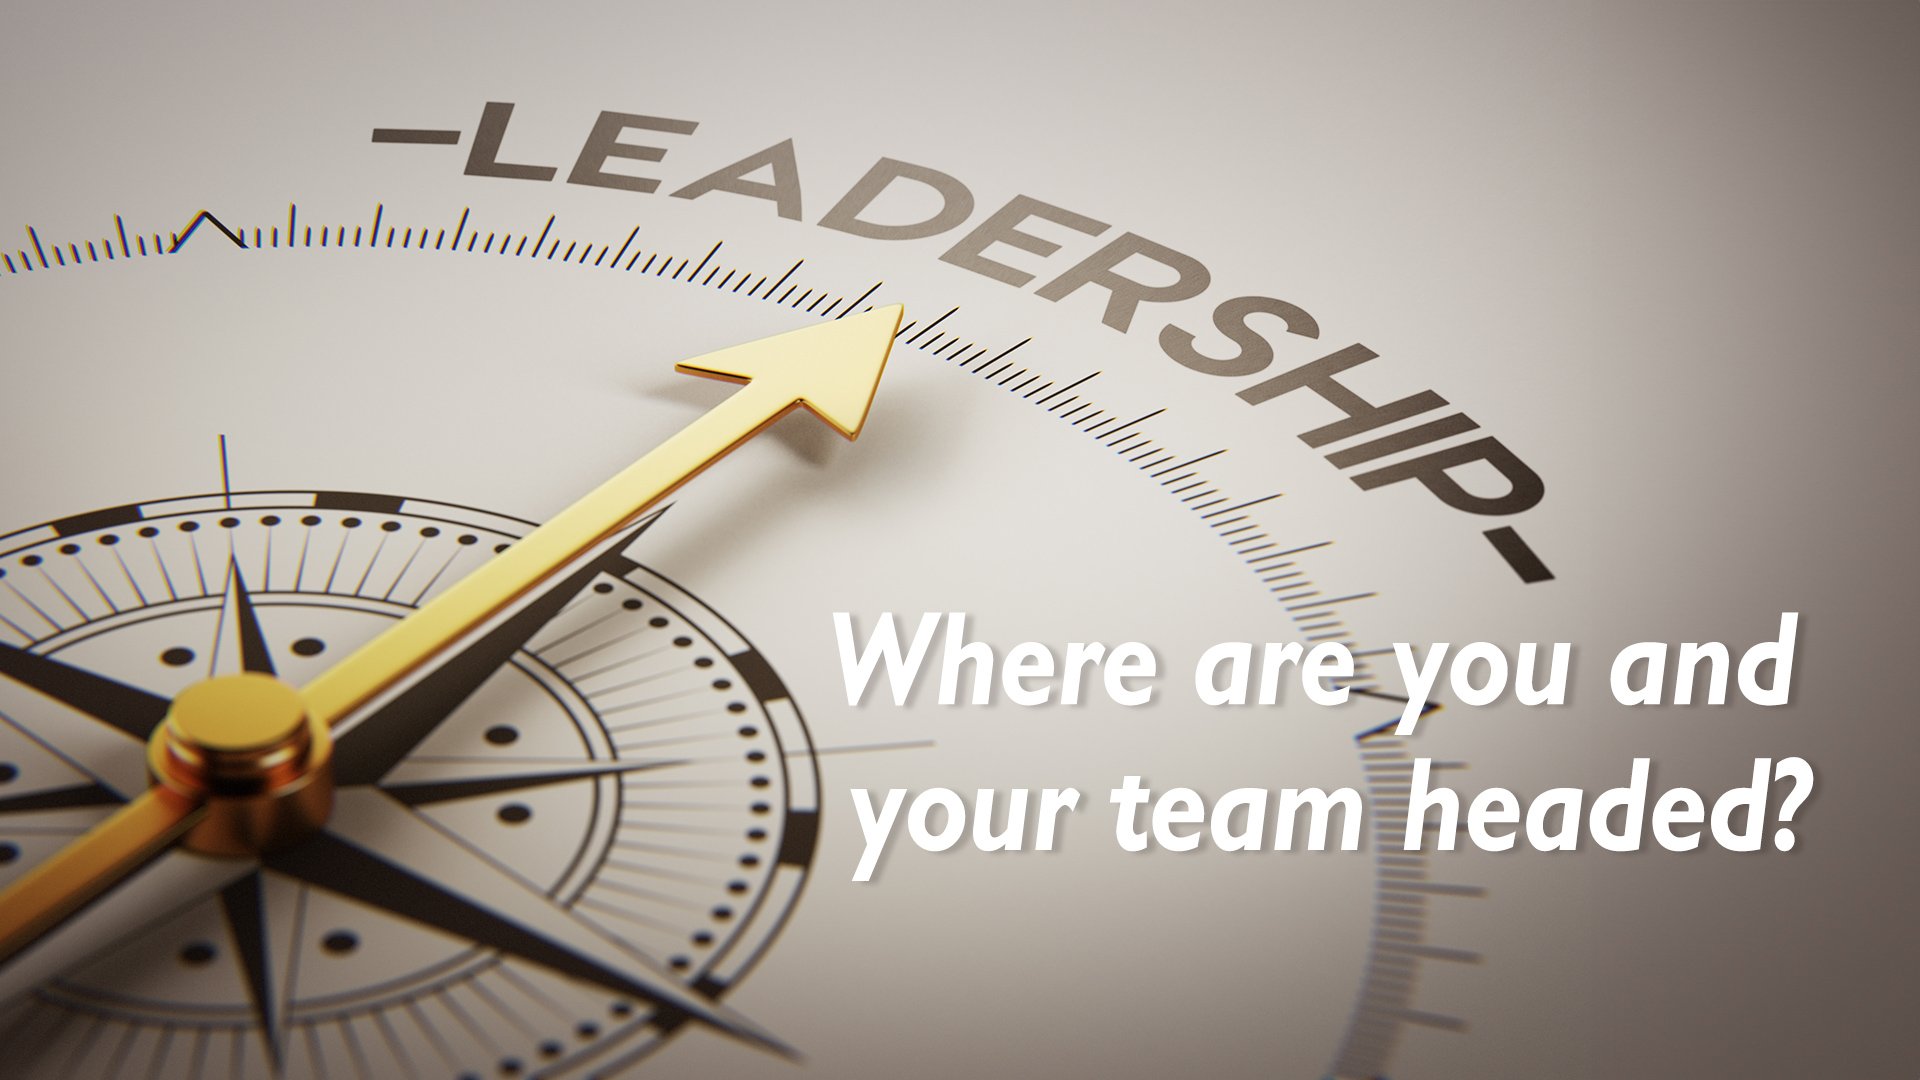 Where are you and your team headed?